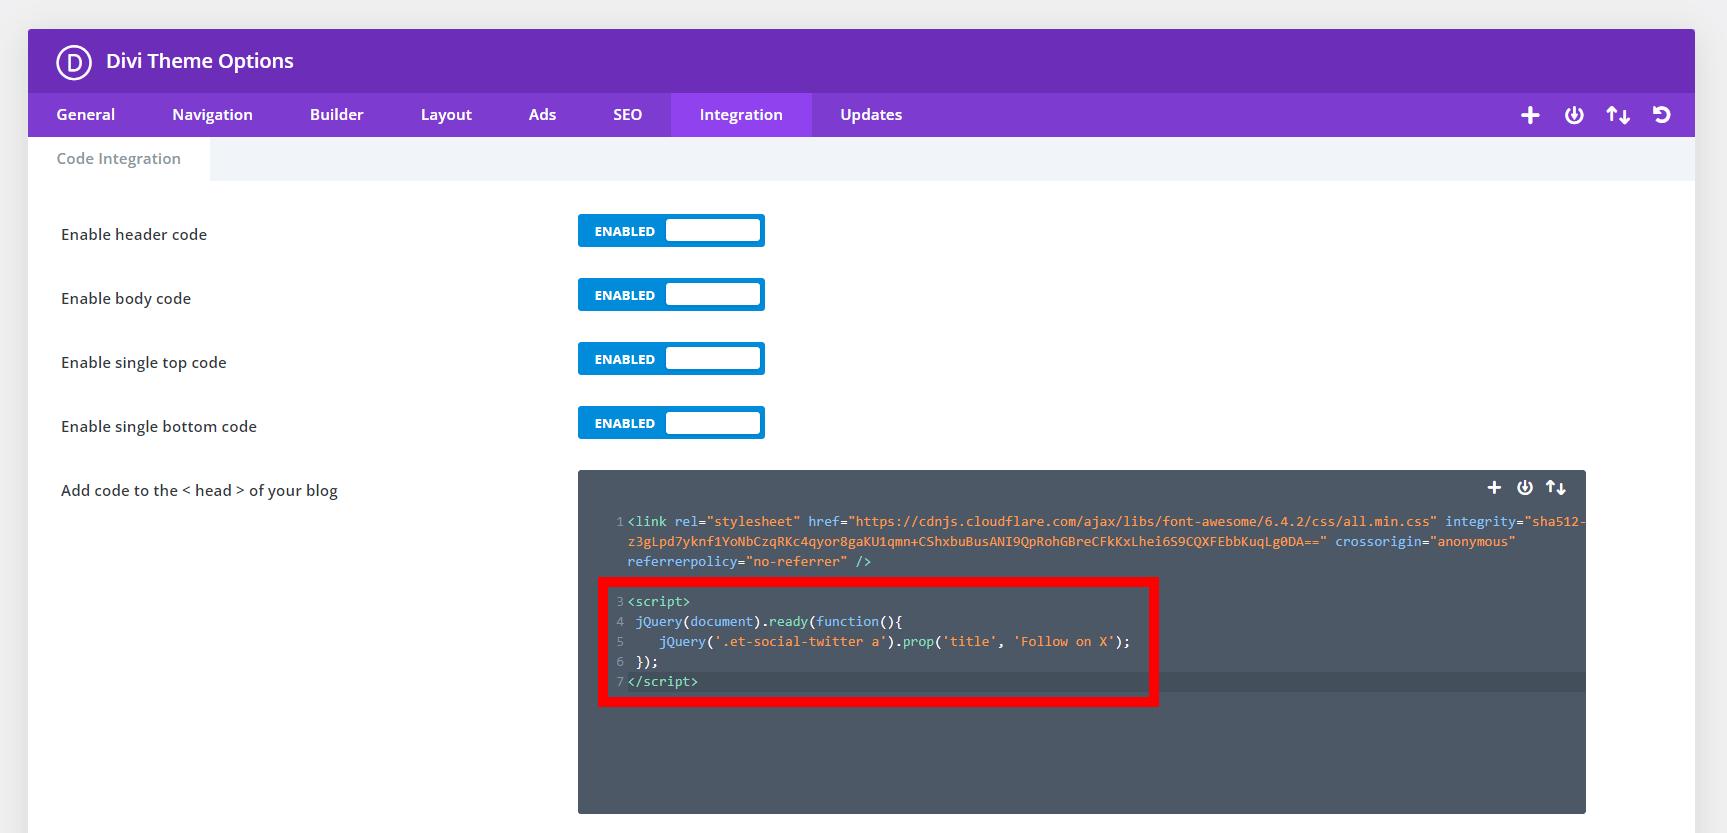 add jQuery to replace the Twitter hover tooltip in the Divi Social Follow module